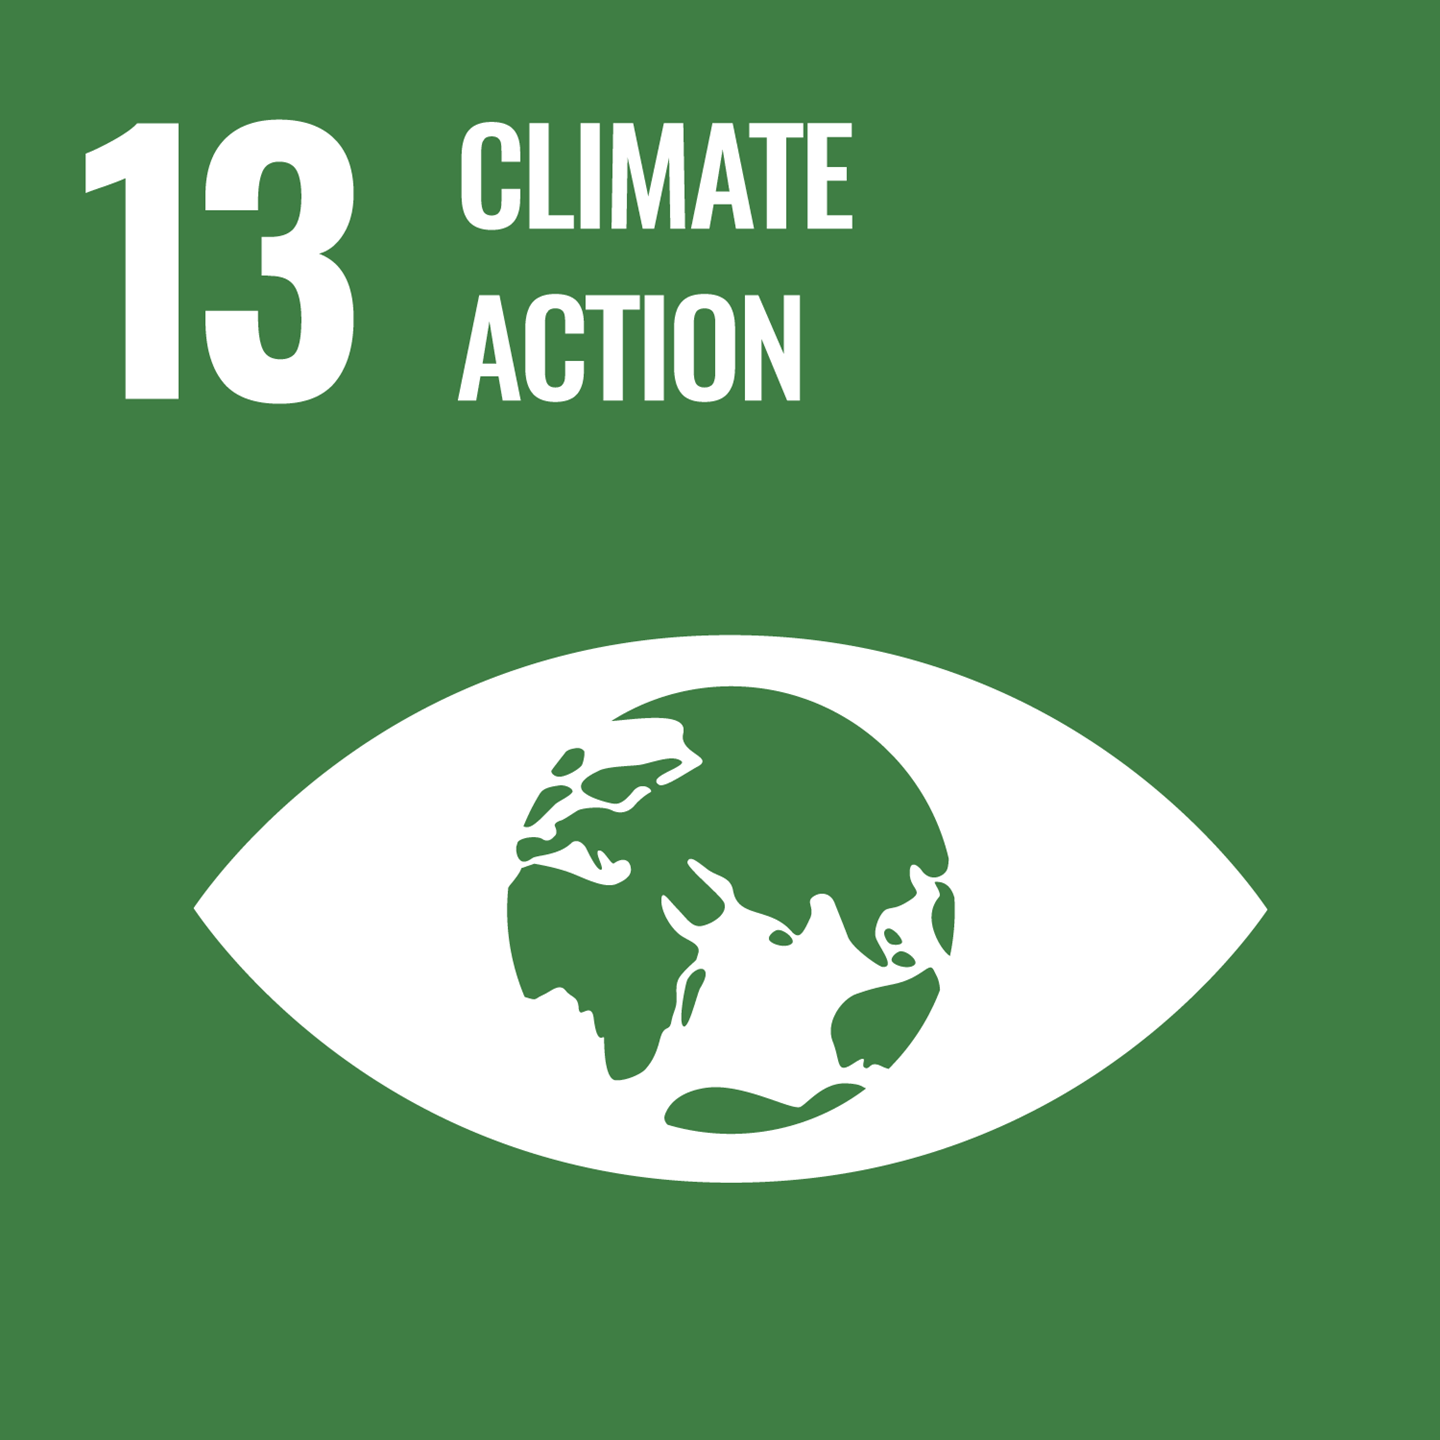 Sustainable Development Goal #13 - Climate Action